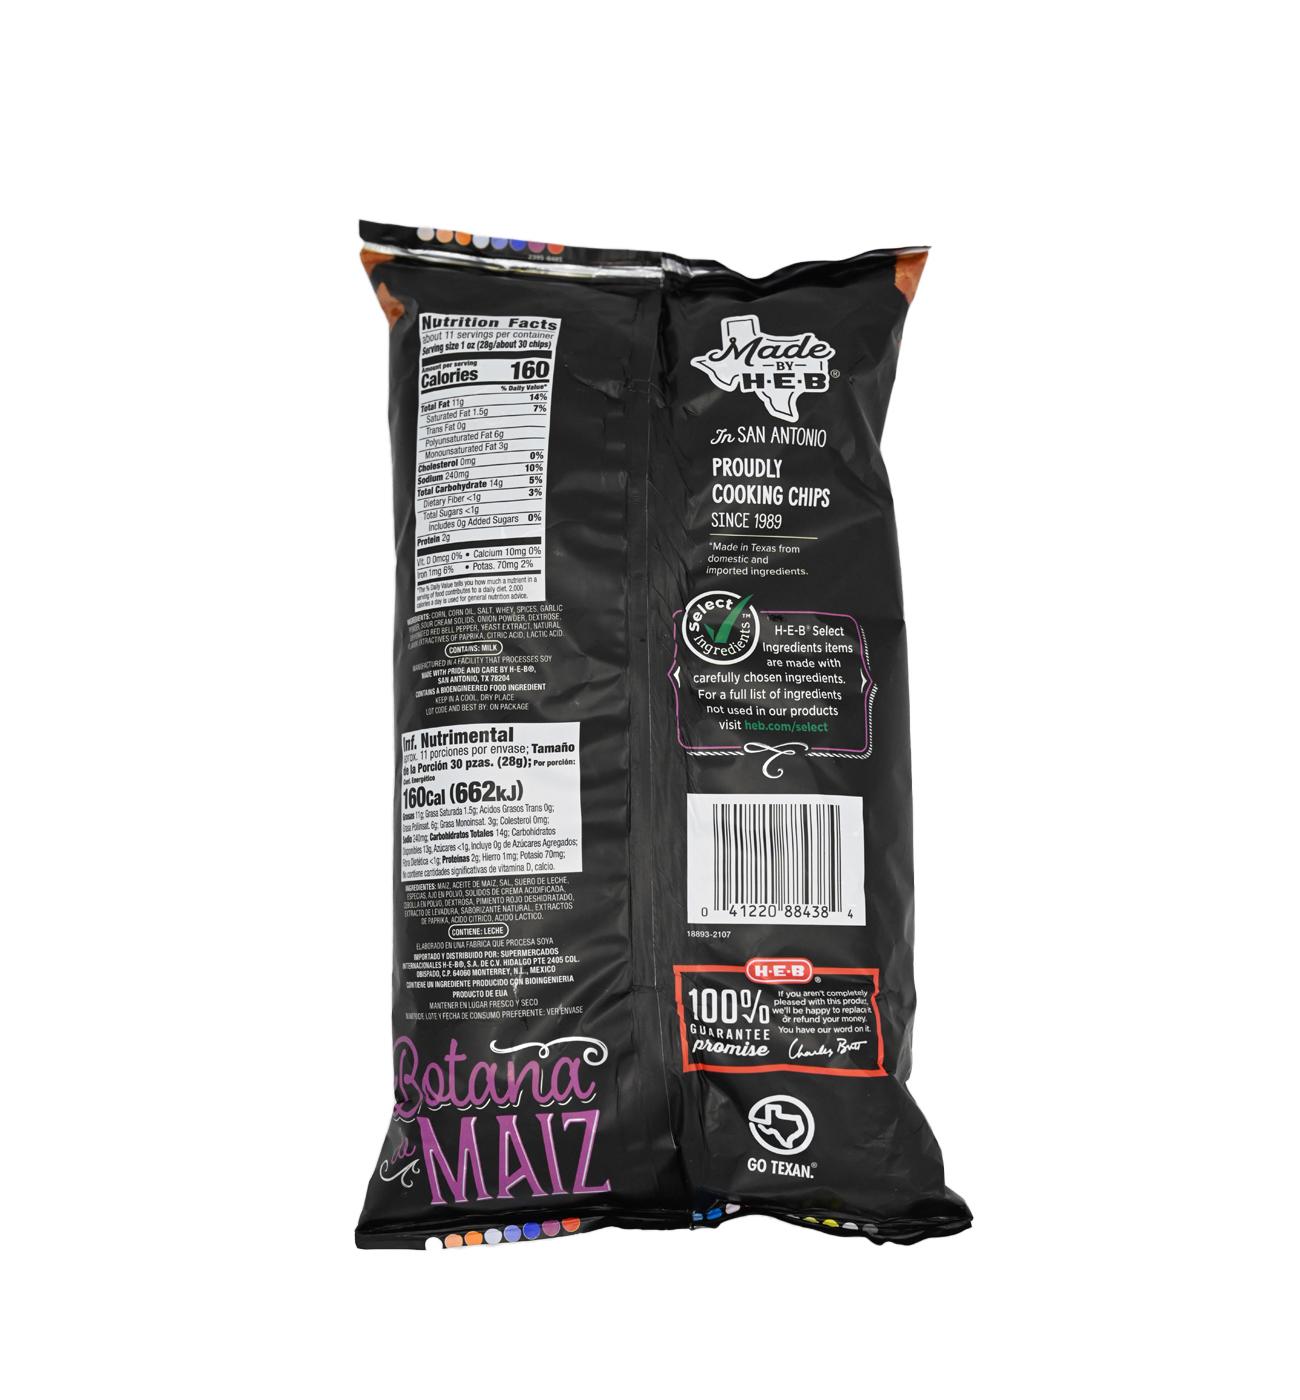 H-E-B Texas Corn Chips - Ghost Pepper Ranch; image 2 of 2